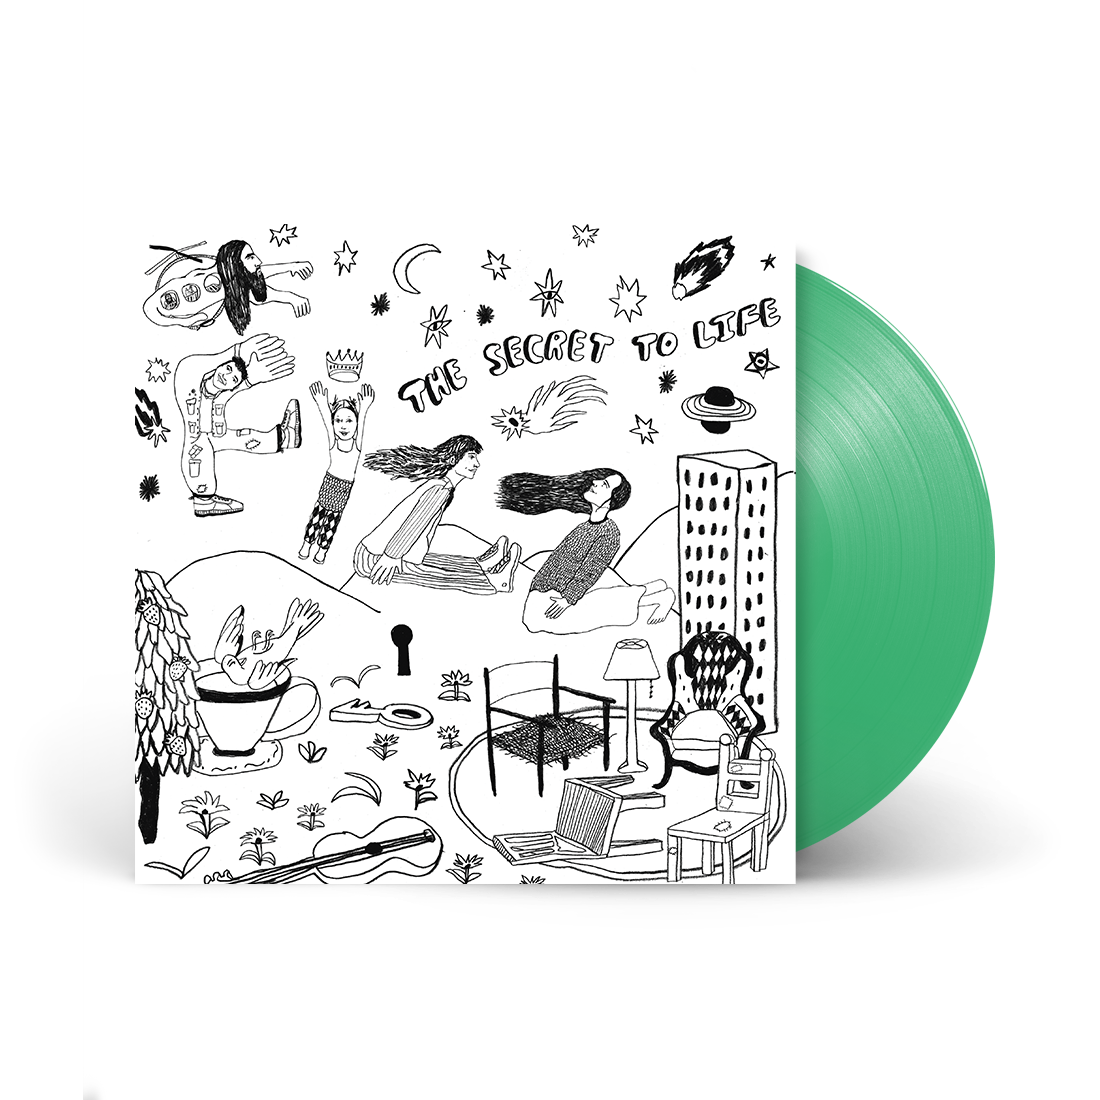 Exclusive The Secret to Life "Colour in" LP